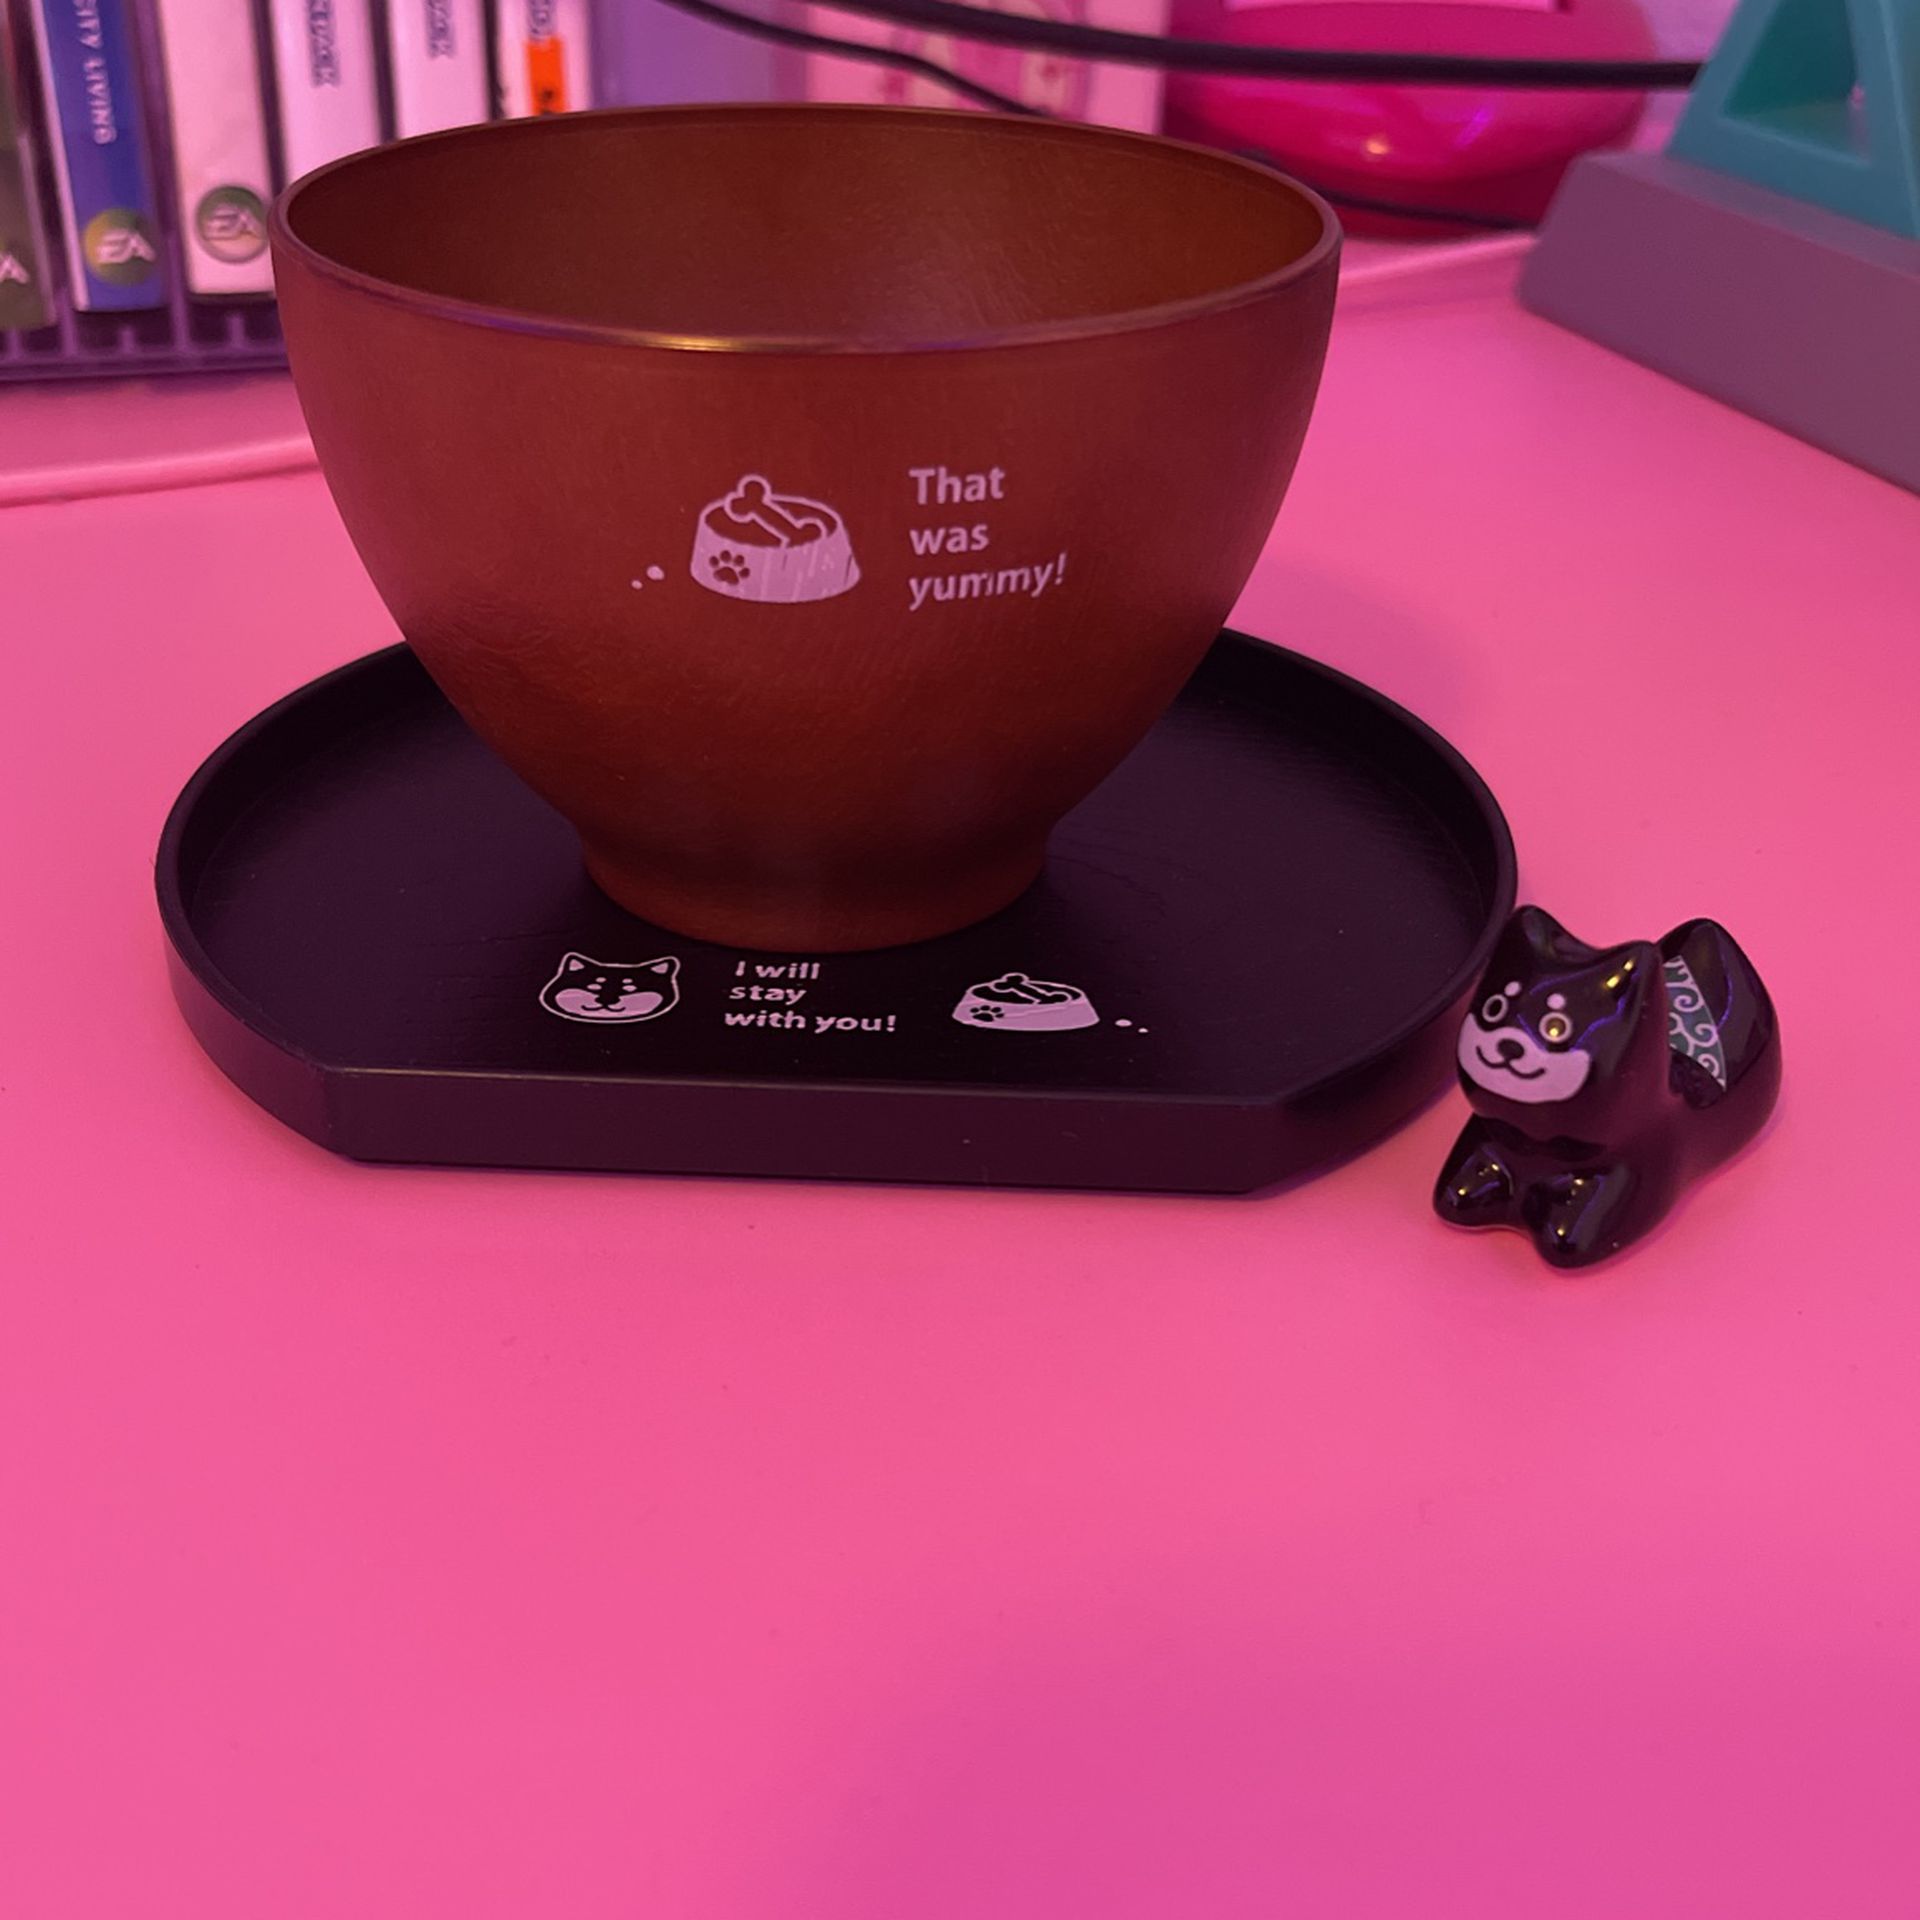 Dog Themed Bowl with Chopstick Stand/Holder